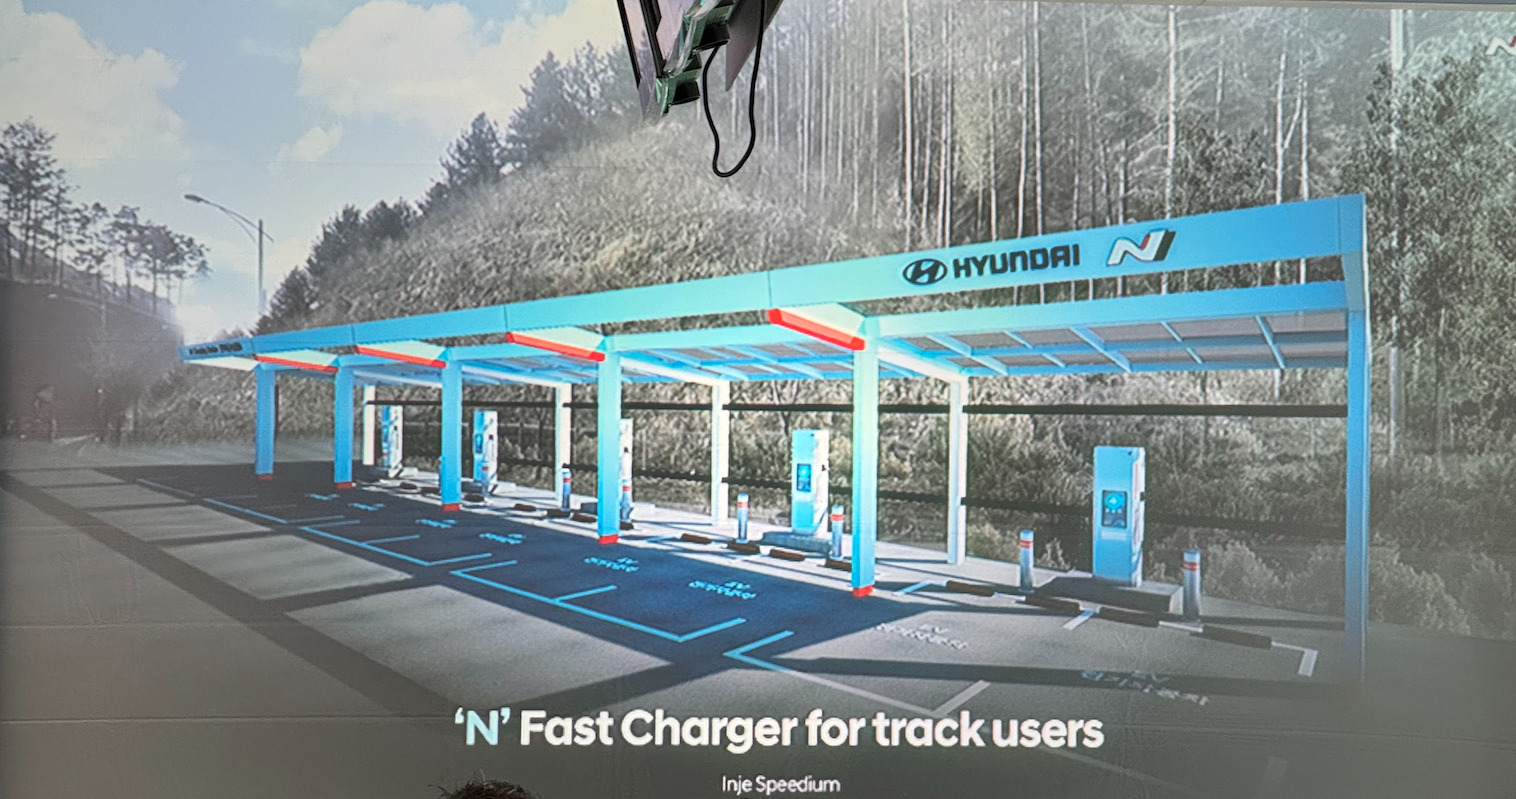 Hyundai N brand specialized fast charging station